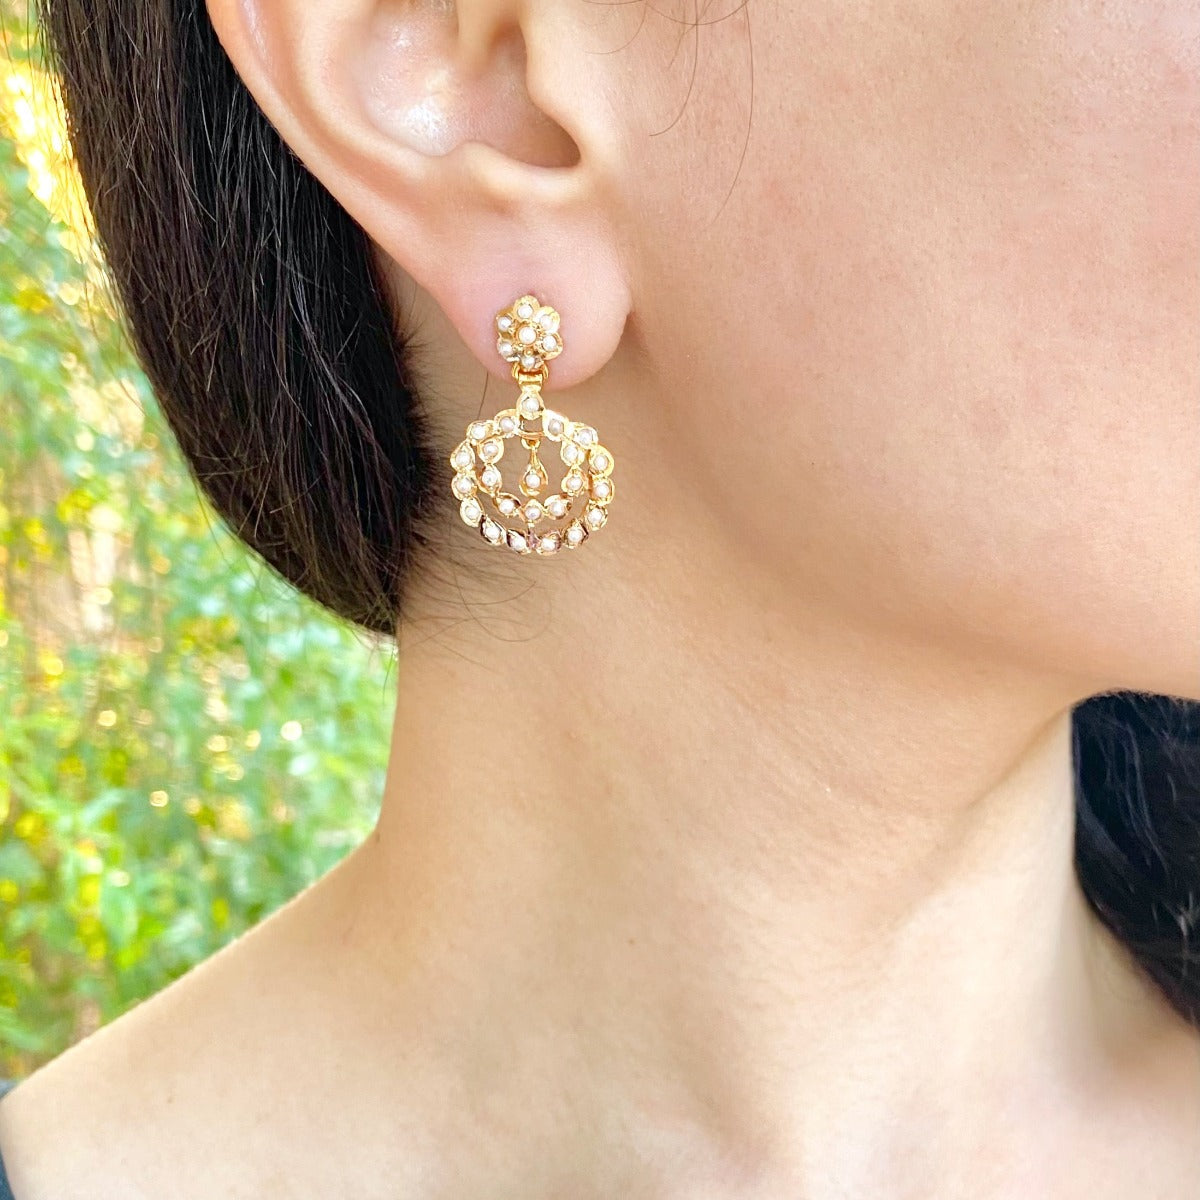 dainty chandbali earrings in gold and pearls